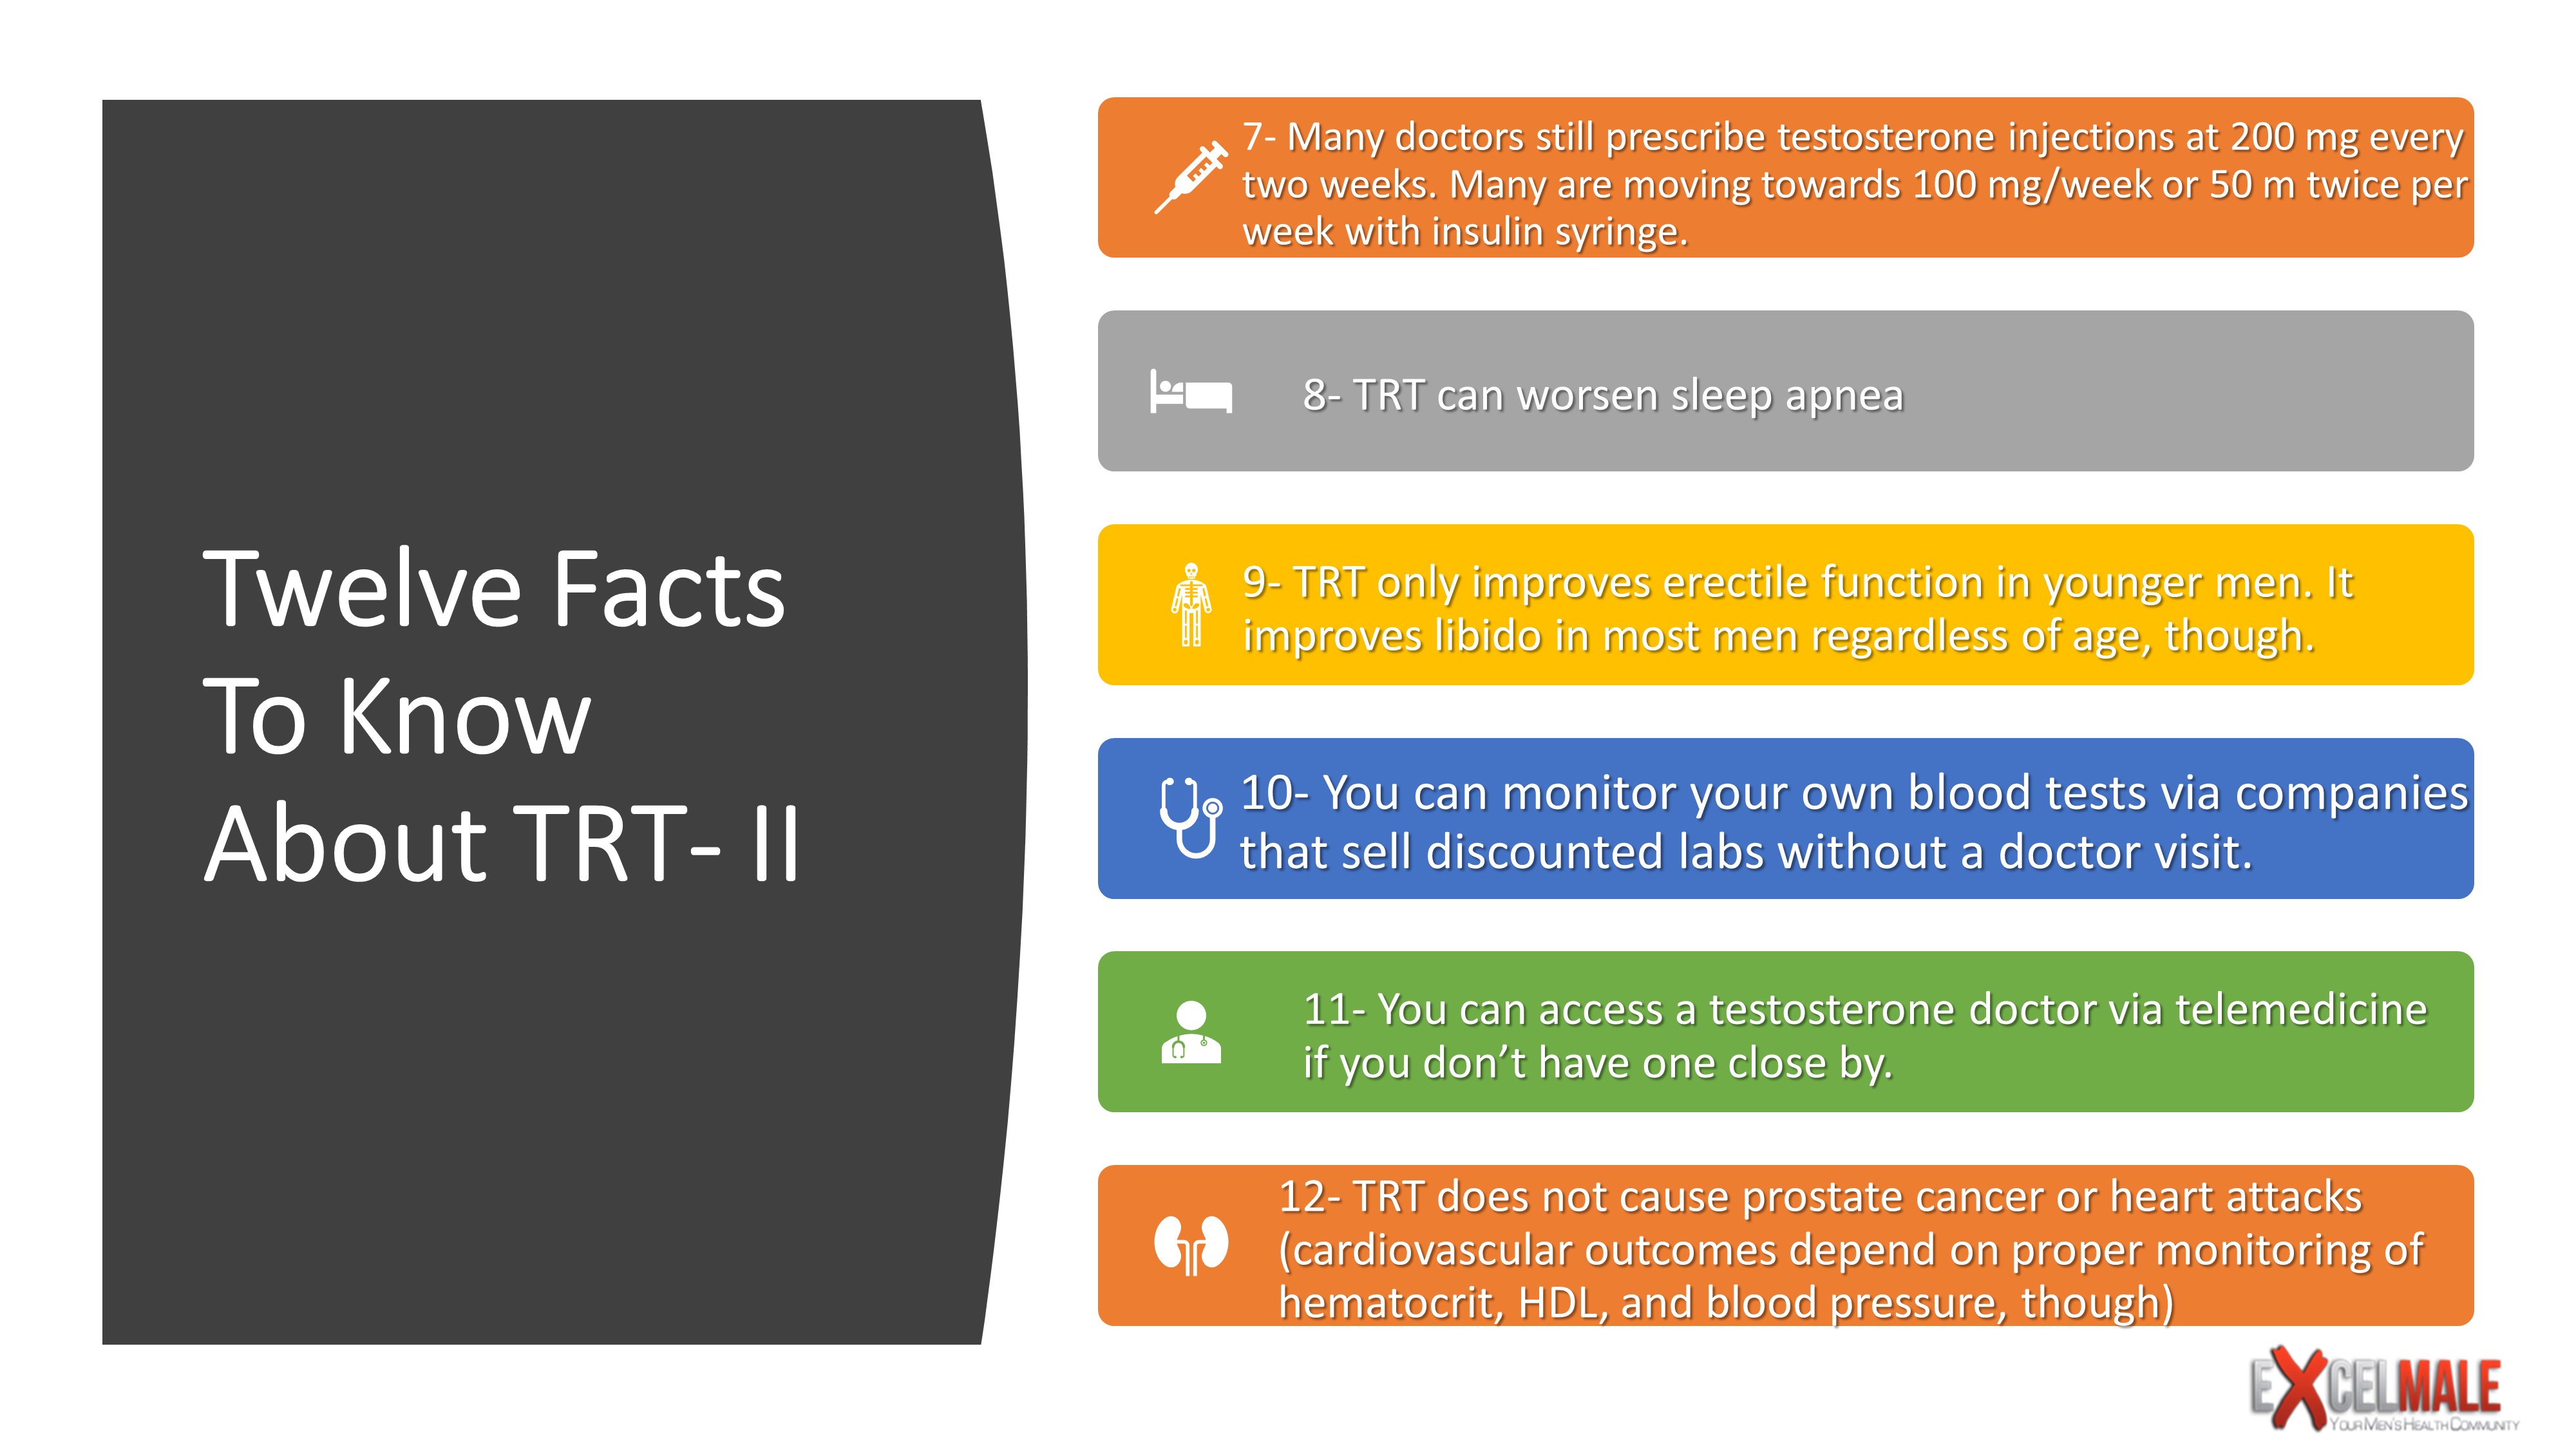 Top Facts to Know About TRT 2.jpg